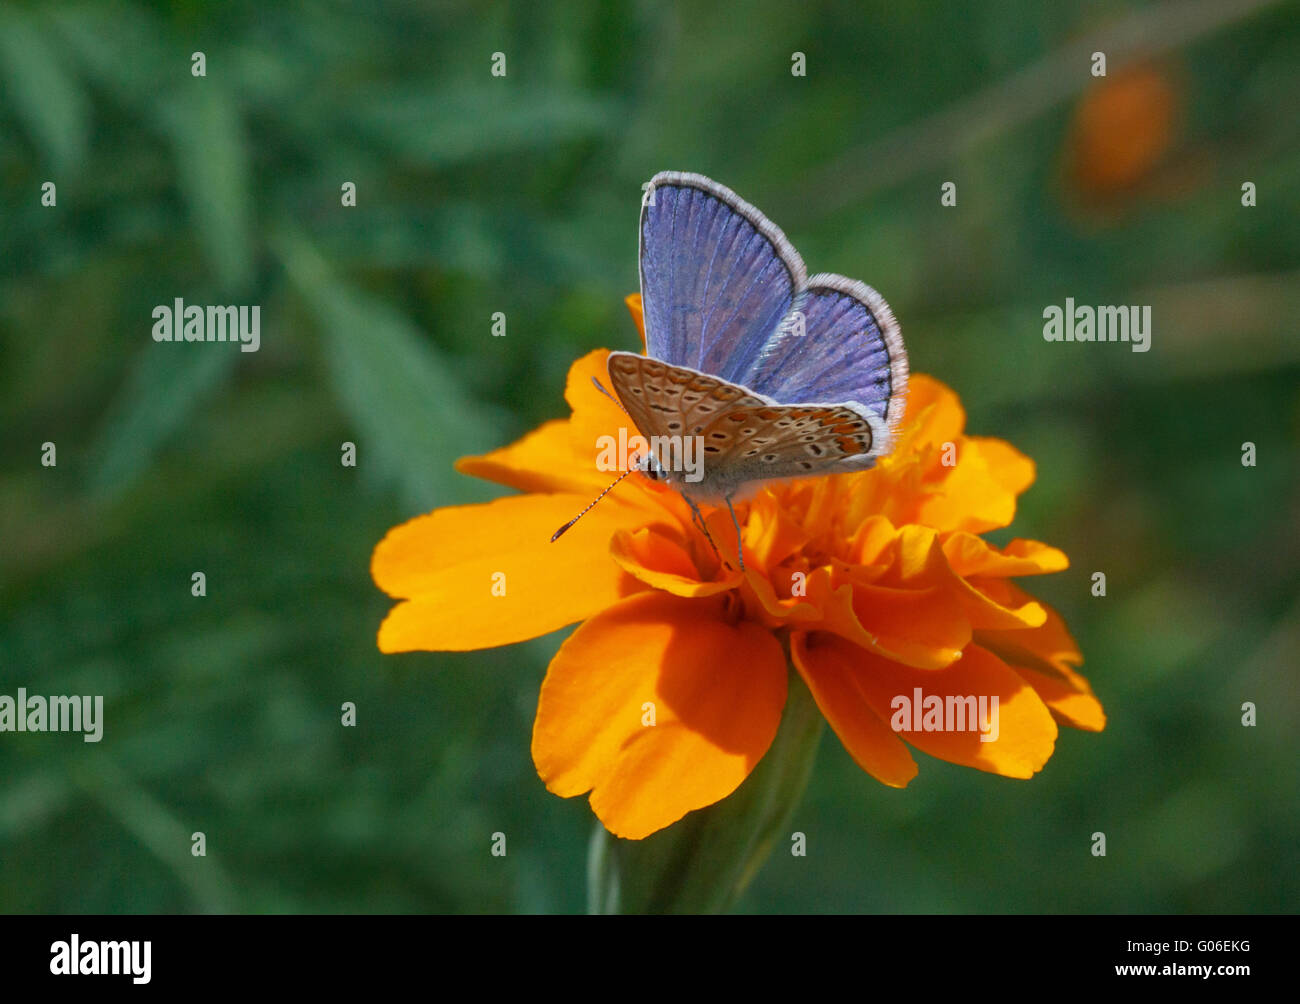 Blue Butterfly sitting on marigold flower Banque D'Images